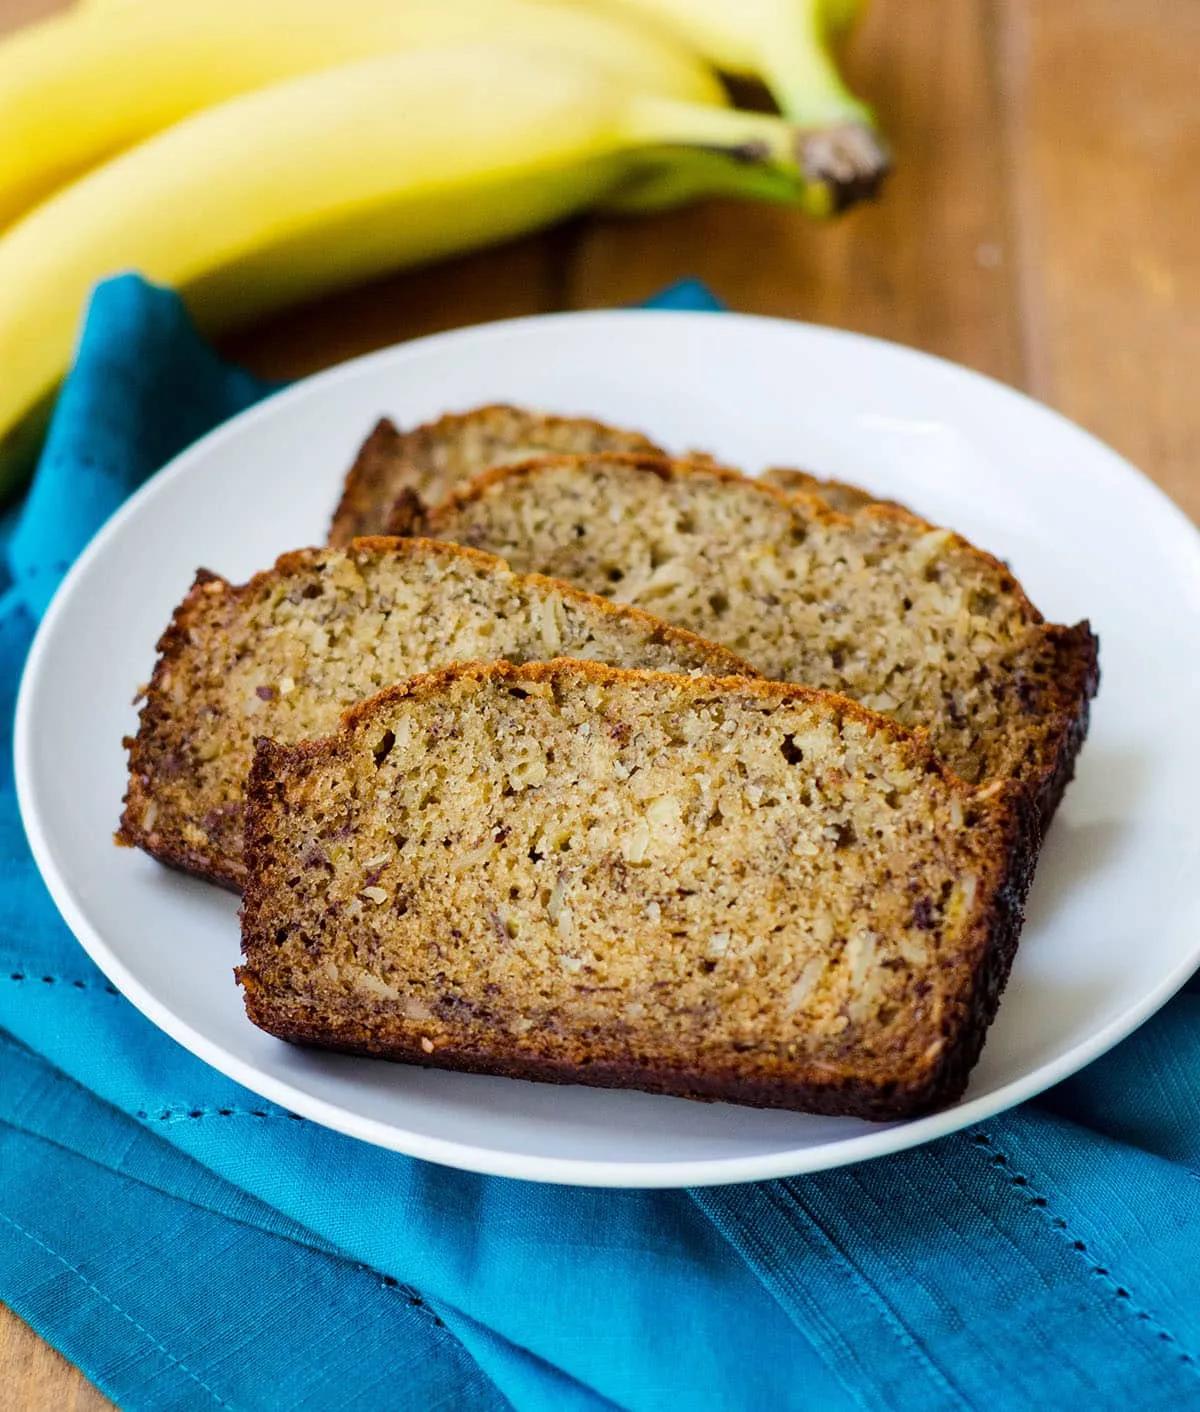 The Most Satisfying Classic Banana Bread – How to Make Perfect Recipes